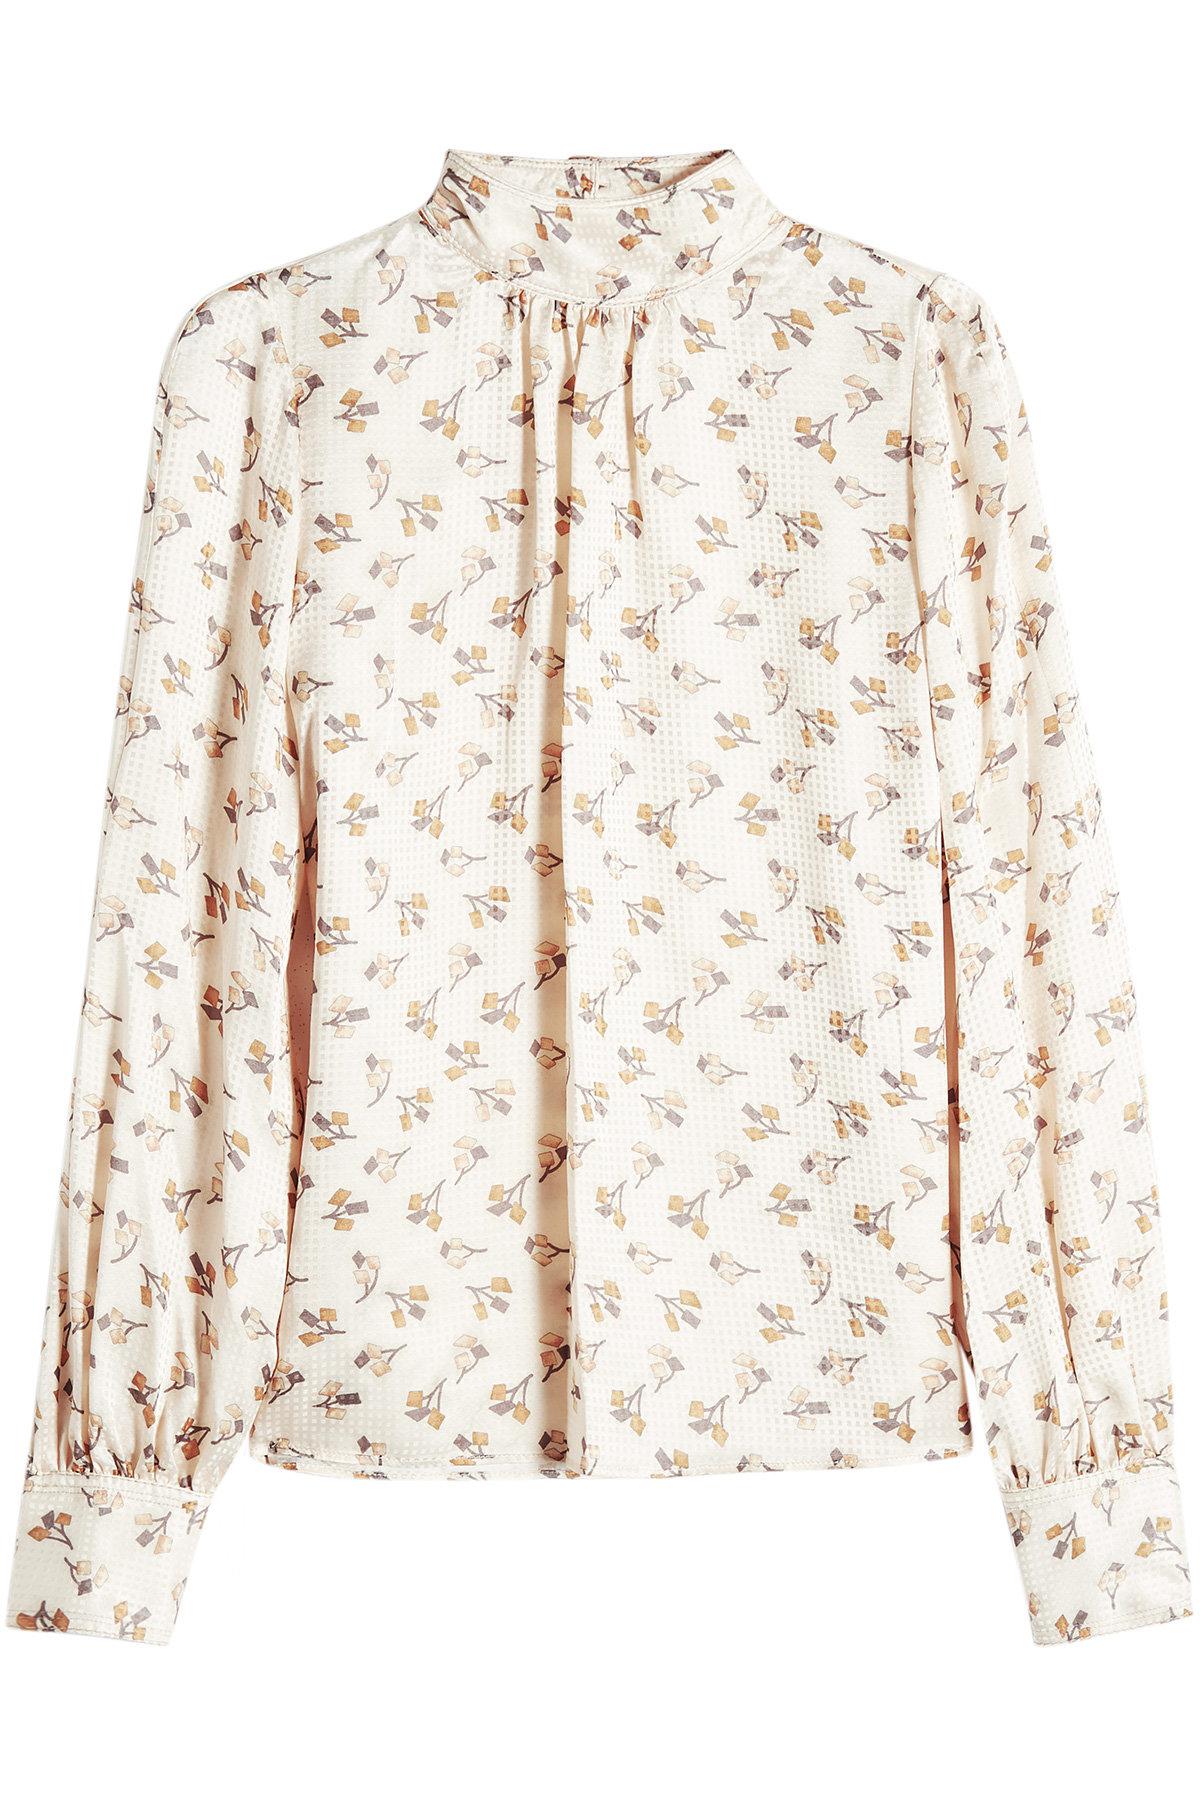 Marc Jacobs Printed Silk Blouse - Lyst